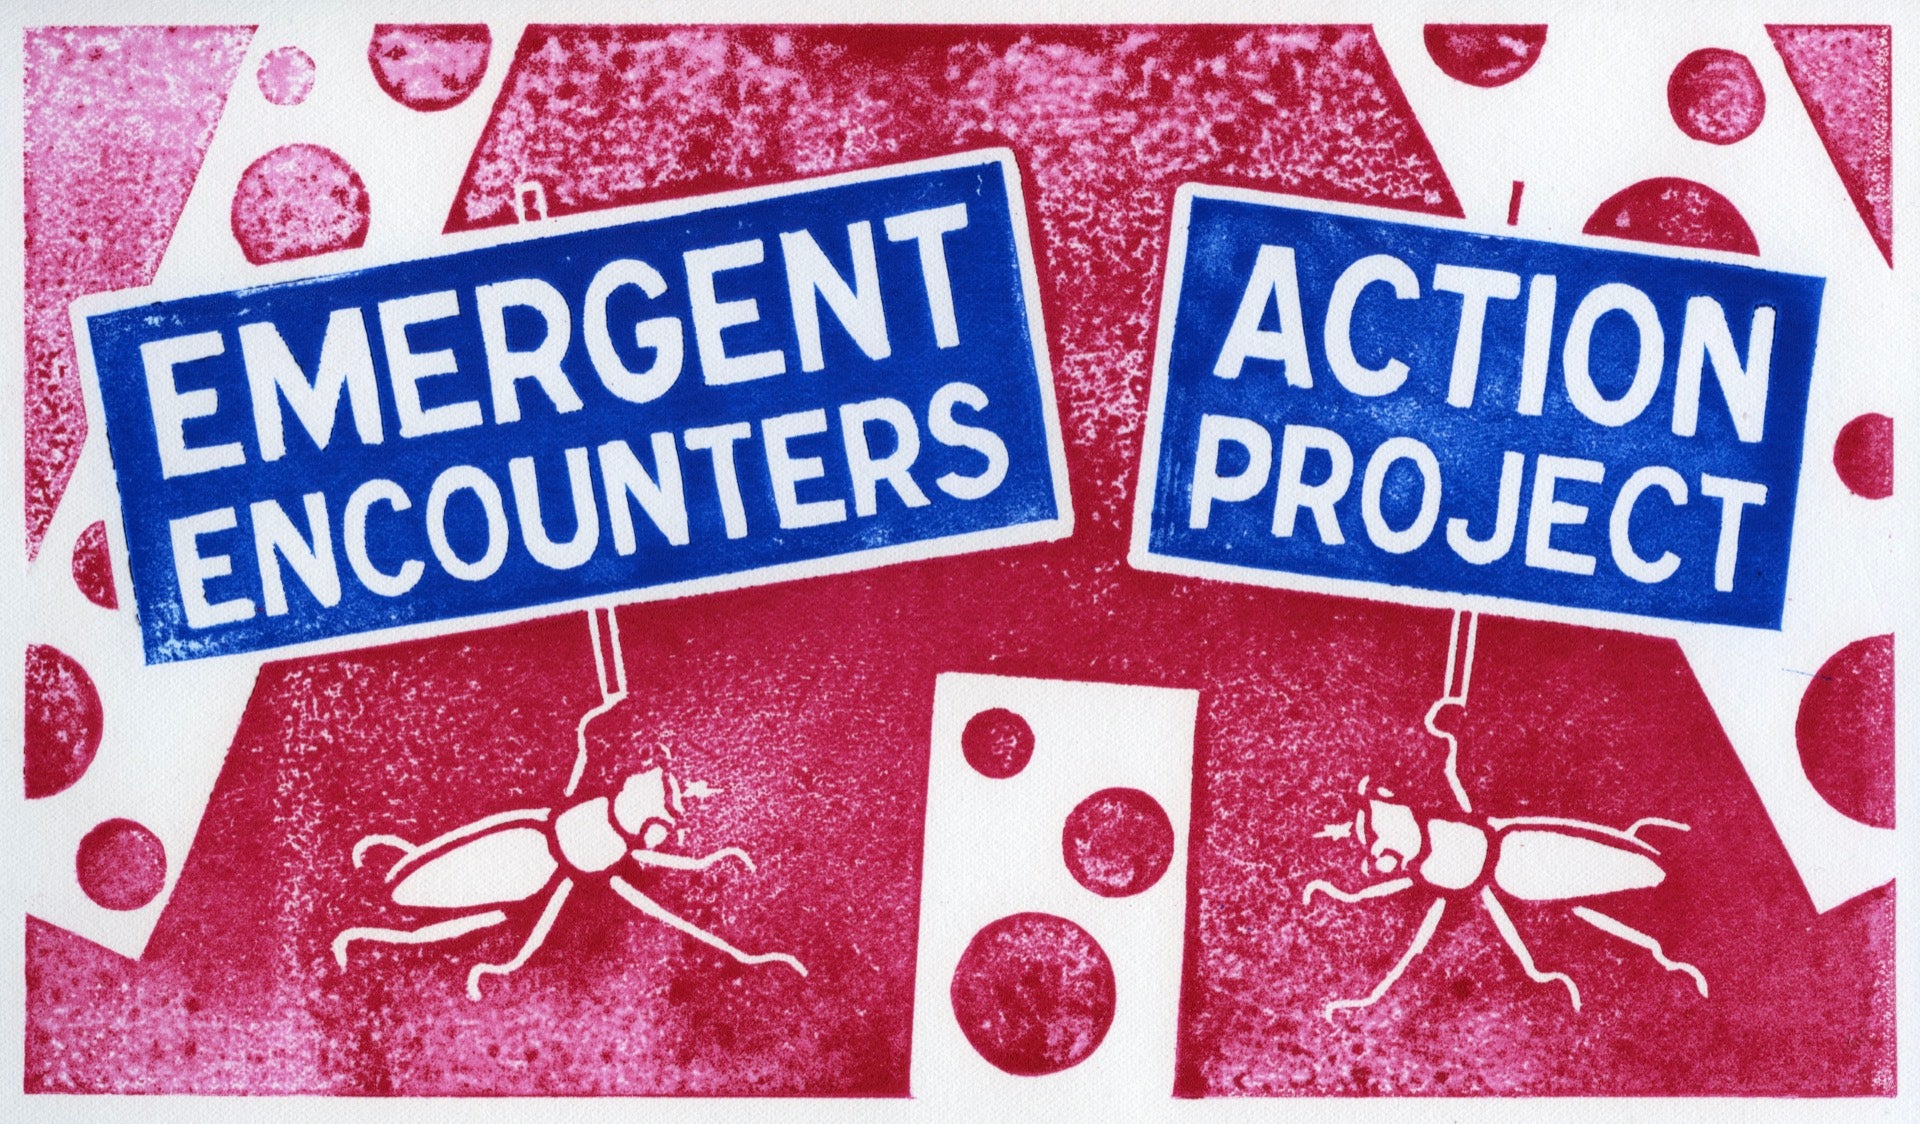 Emergent Encounters Action Project